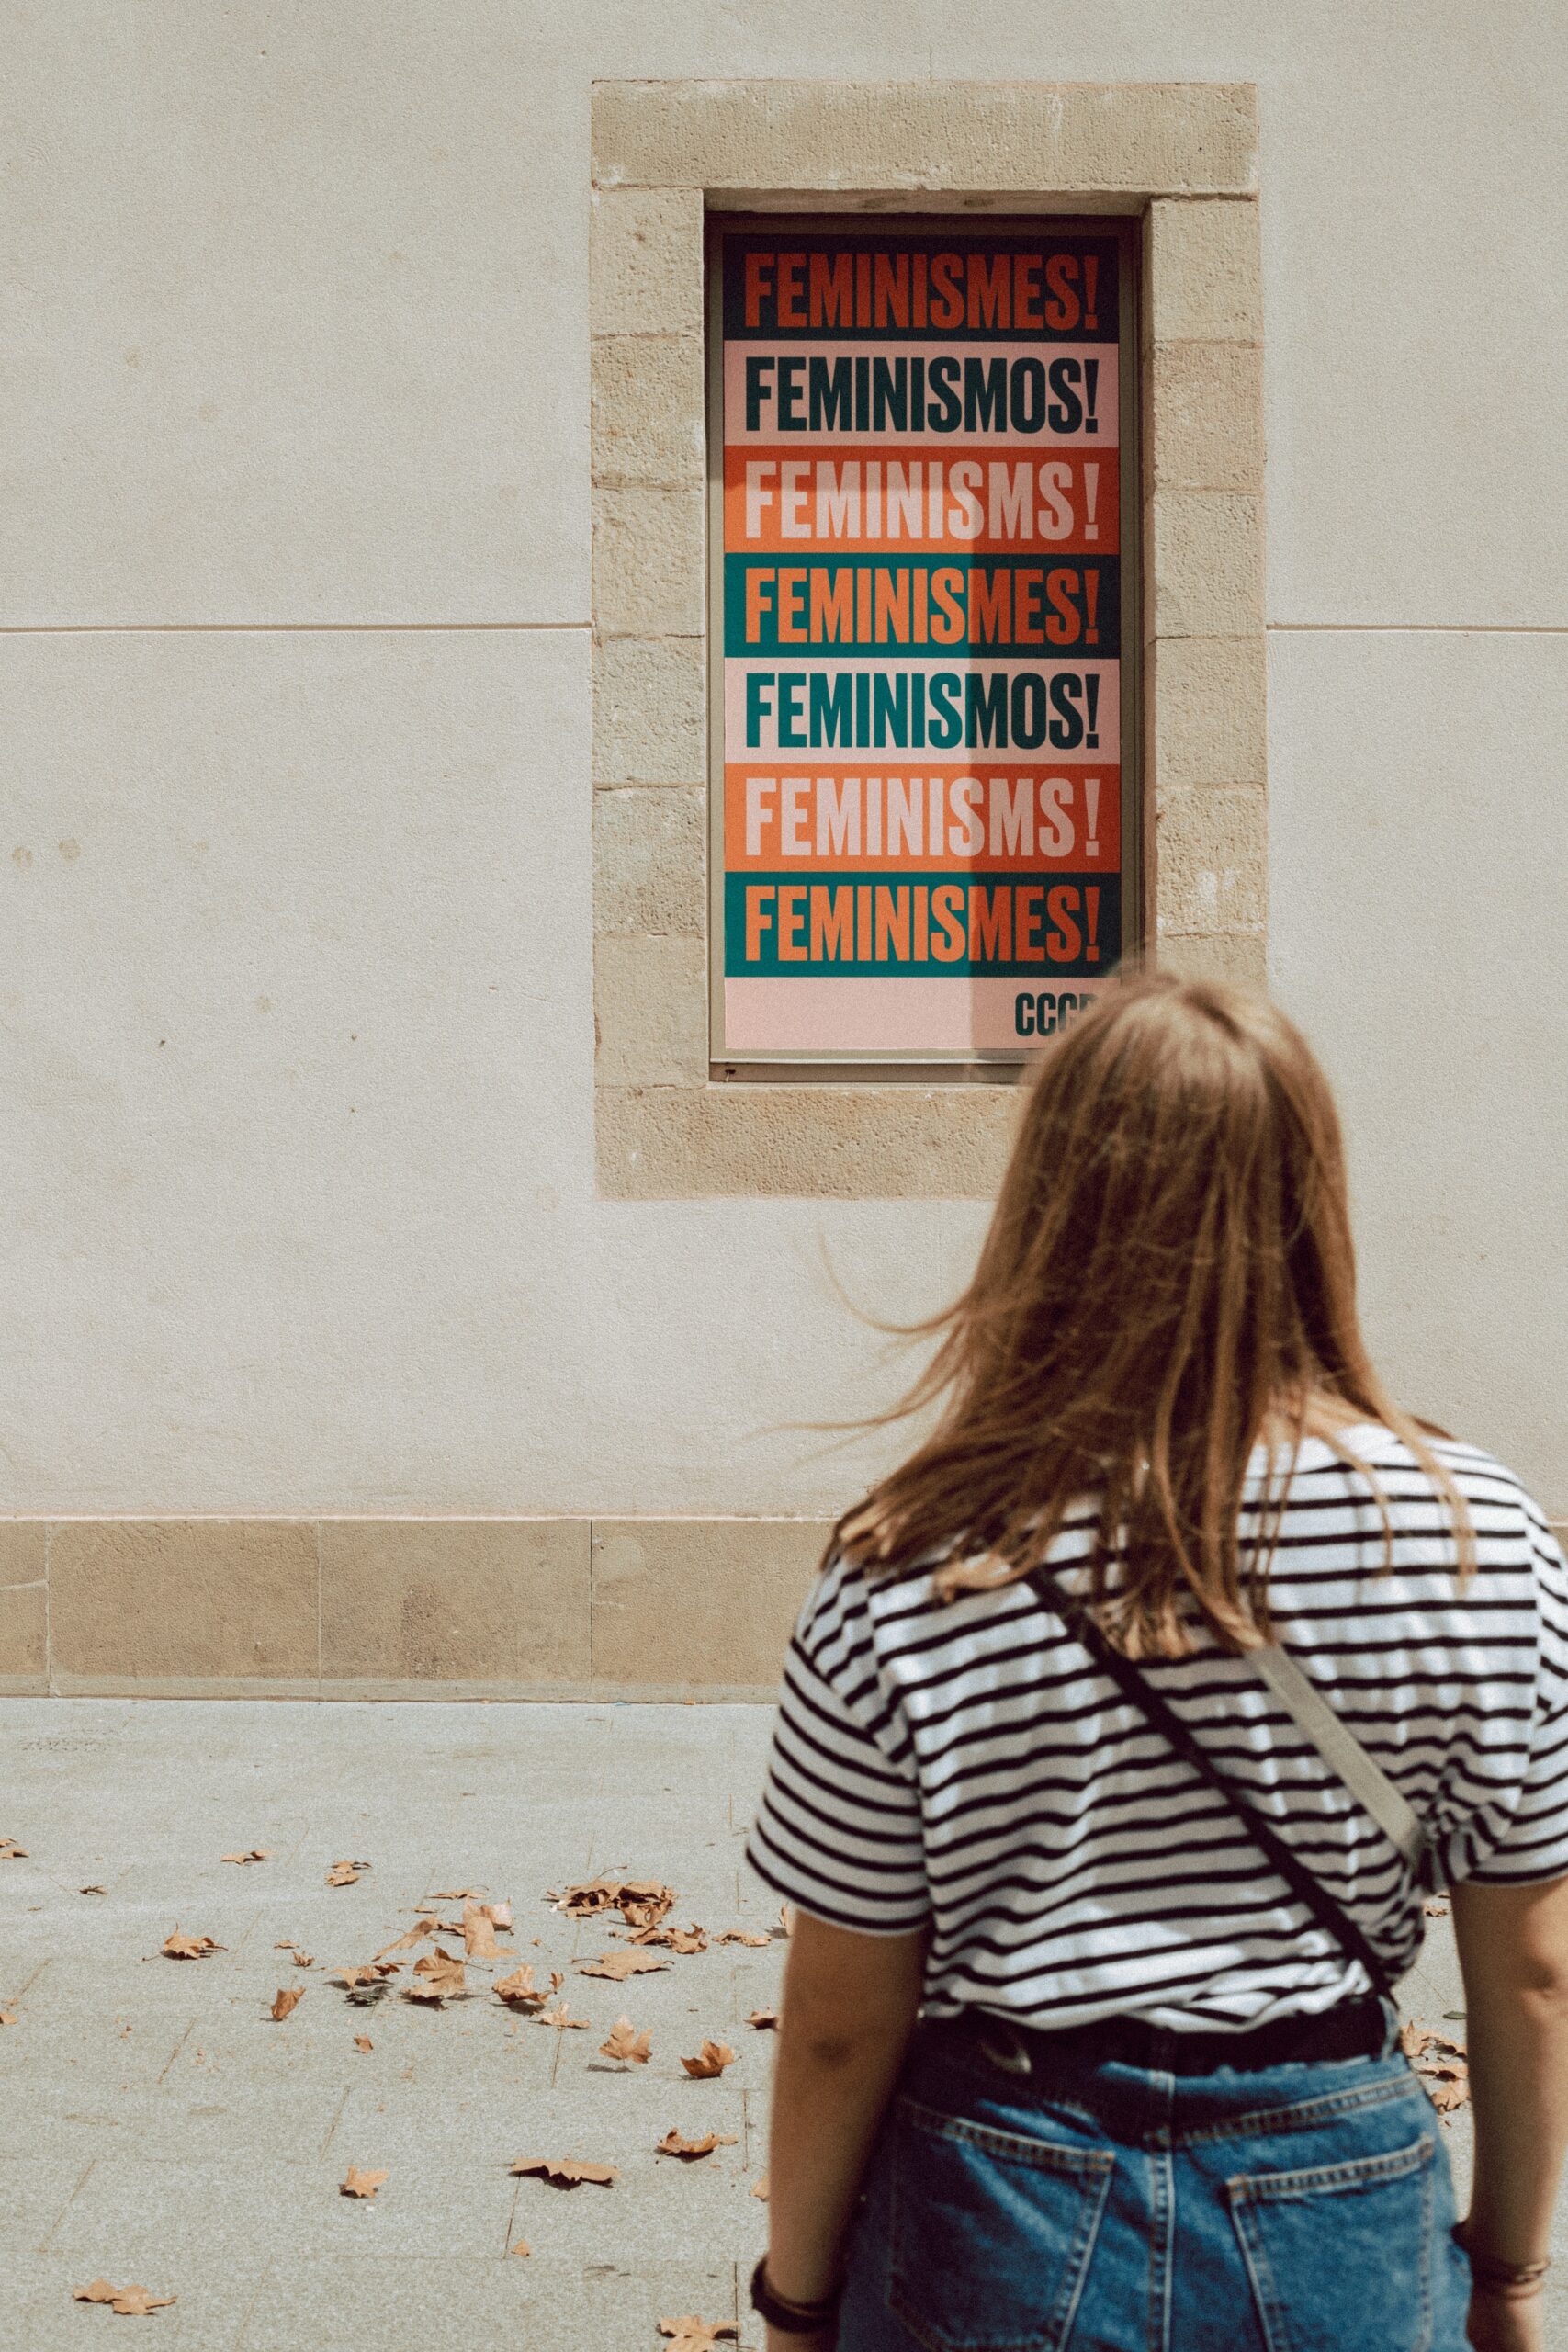 THE WAY WE ARE UNDERSTANDING FEMINISM IS PROBLEMATIC